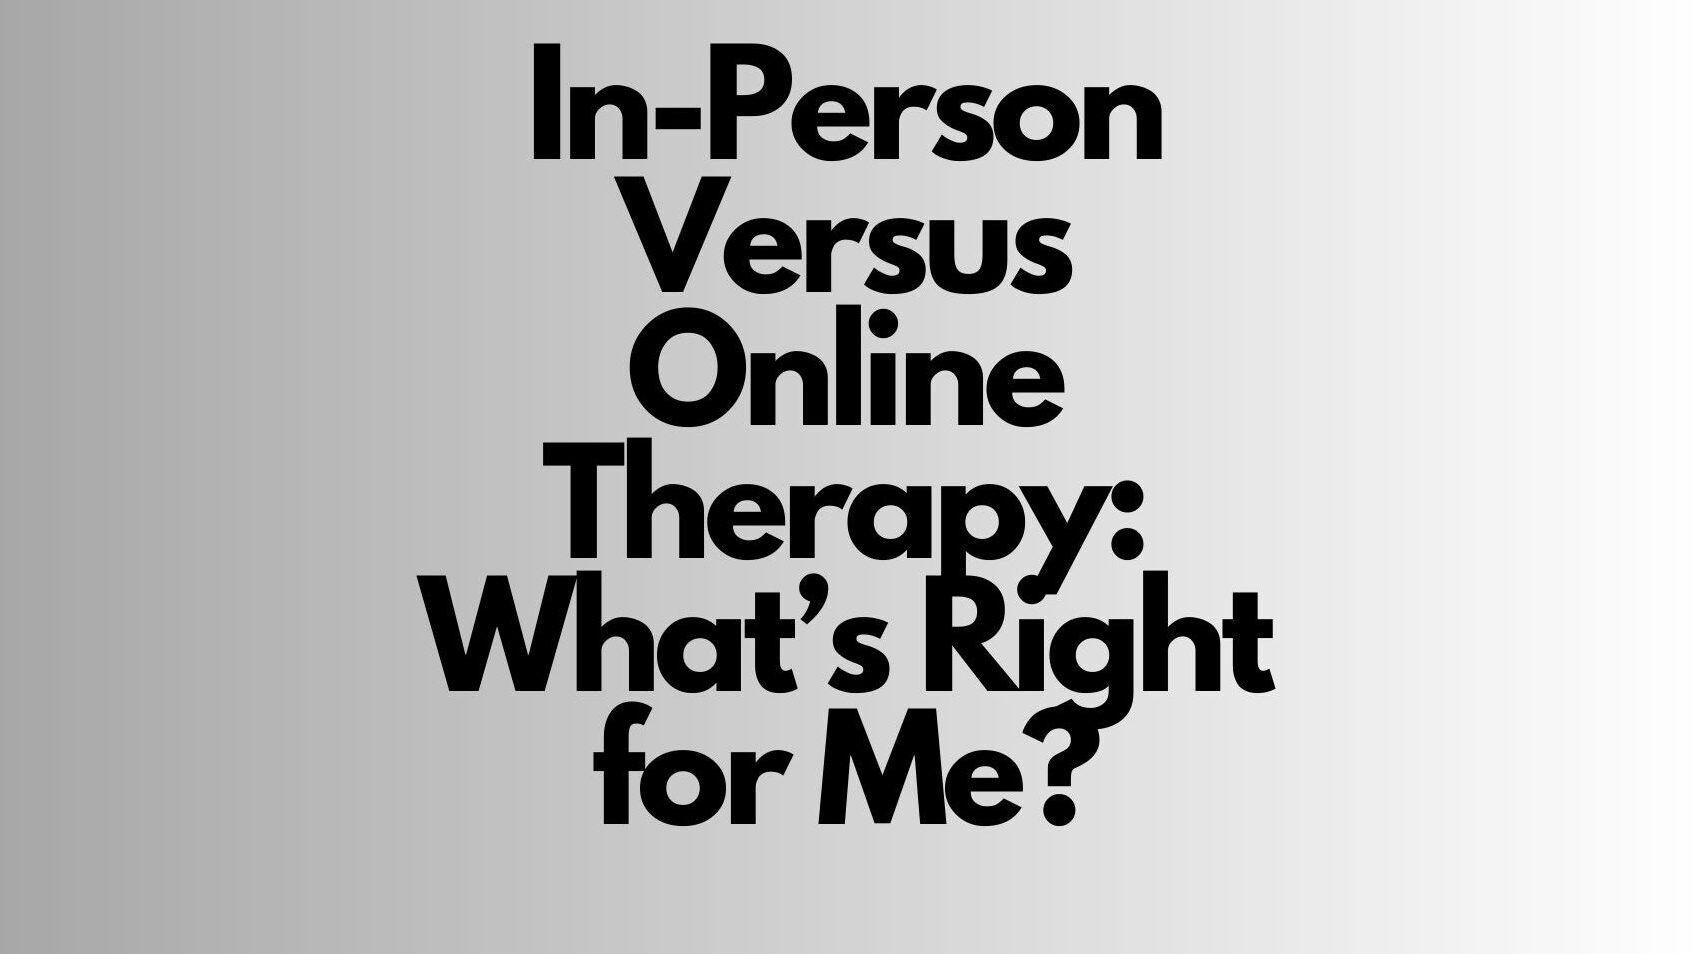 In-person vs online therapy, what’s right for me?